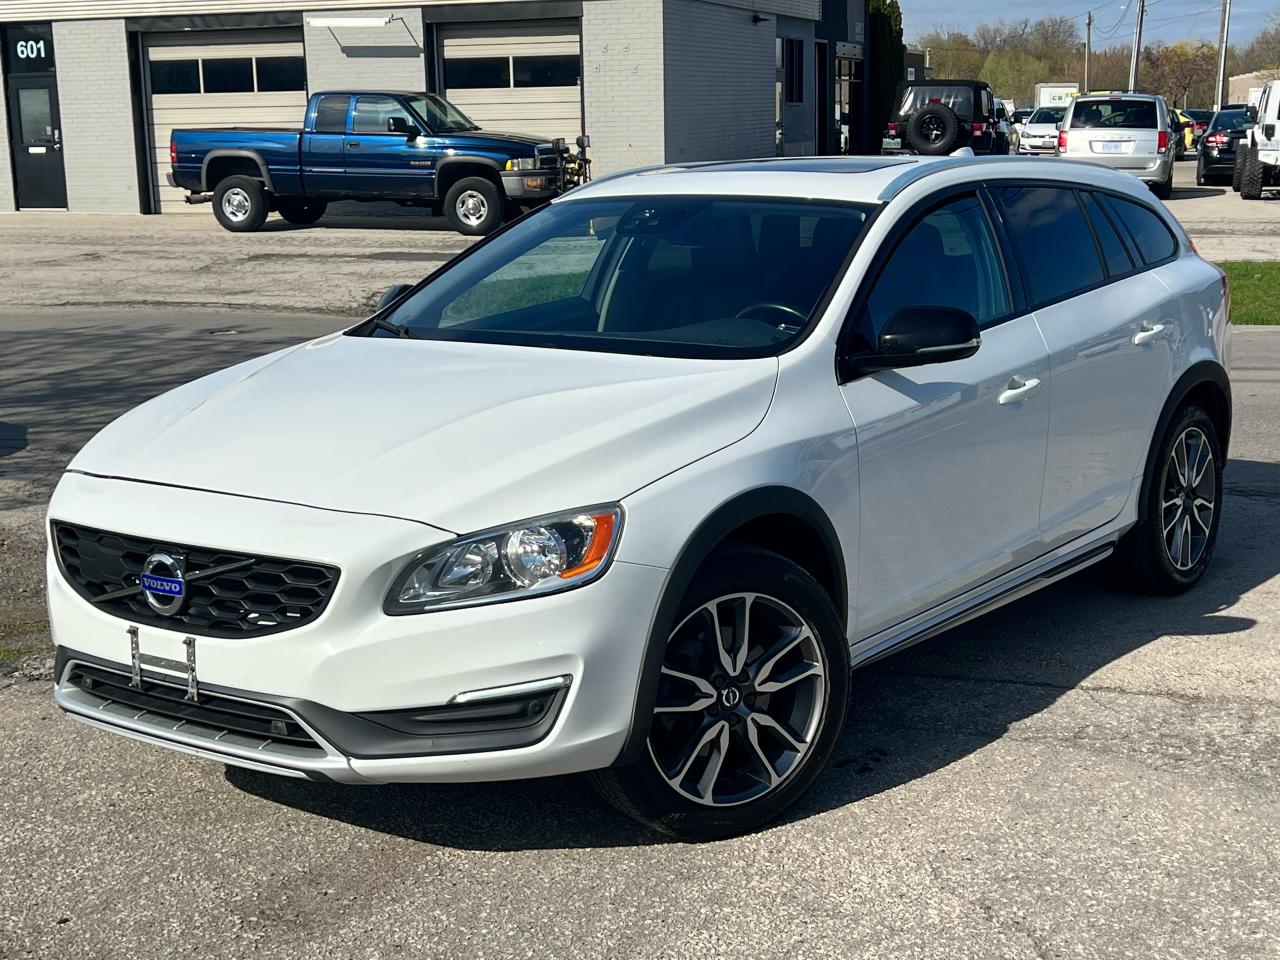 2015 Volvo V60 cross country T5 Platinum AWD loaded - Photo #1